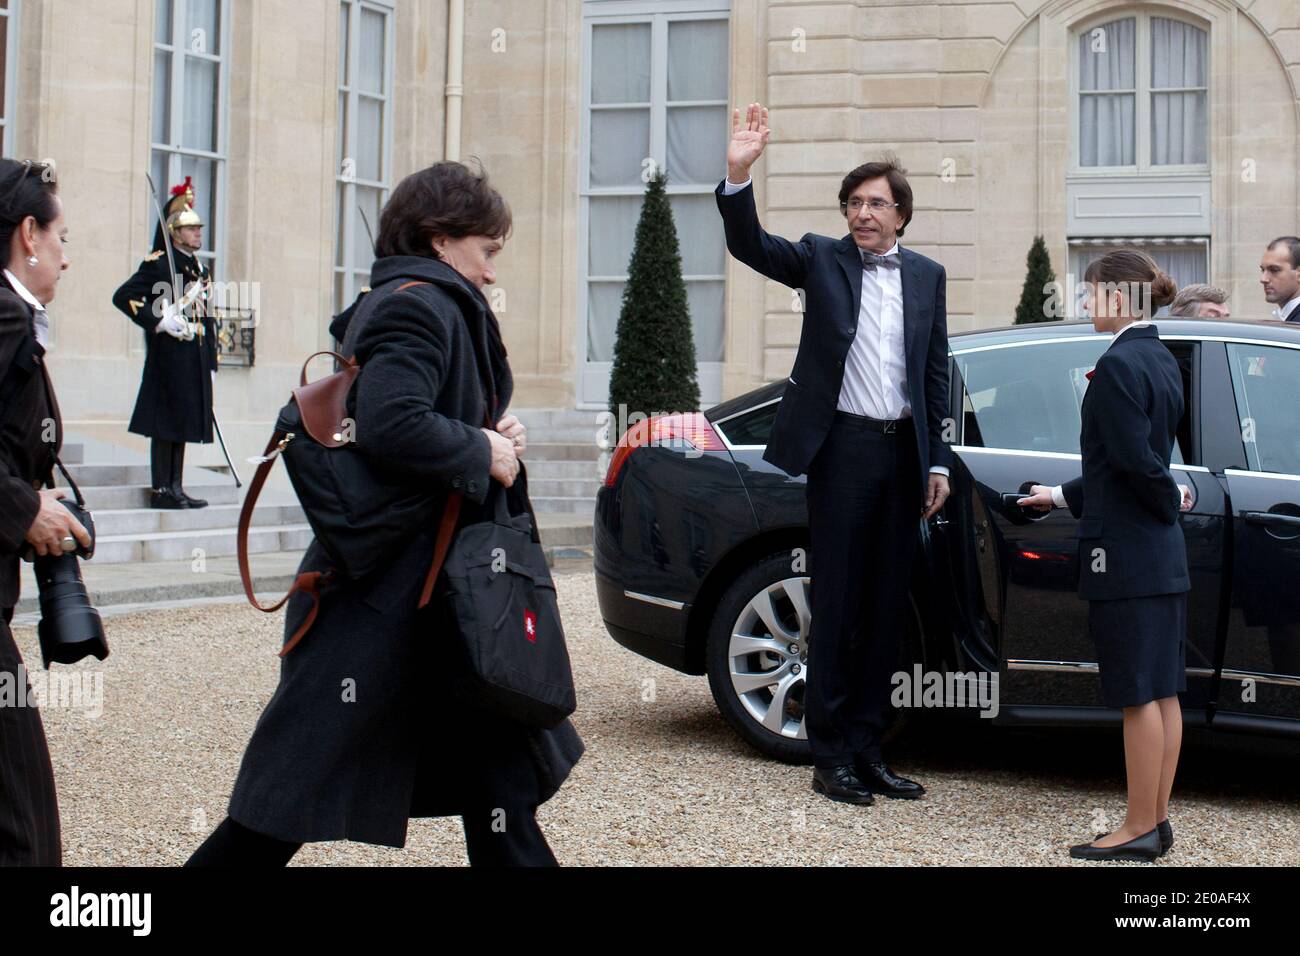 Belgium Prime Minister Elio Di Rupo salutes as he leaves the Elysee Palace after a meeting with French President Nicolas Sarkozy, in Paris, France on February 24, 2012. Photo by Stephane Lemouton/ABACAPRESS.COM. Stock Photo